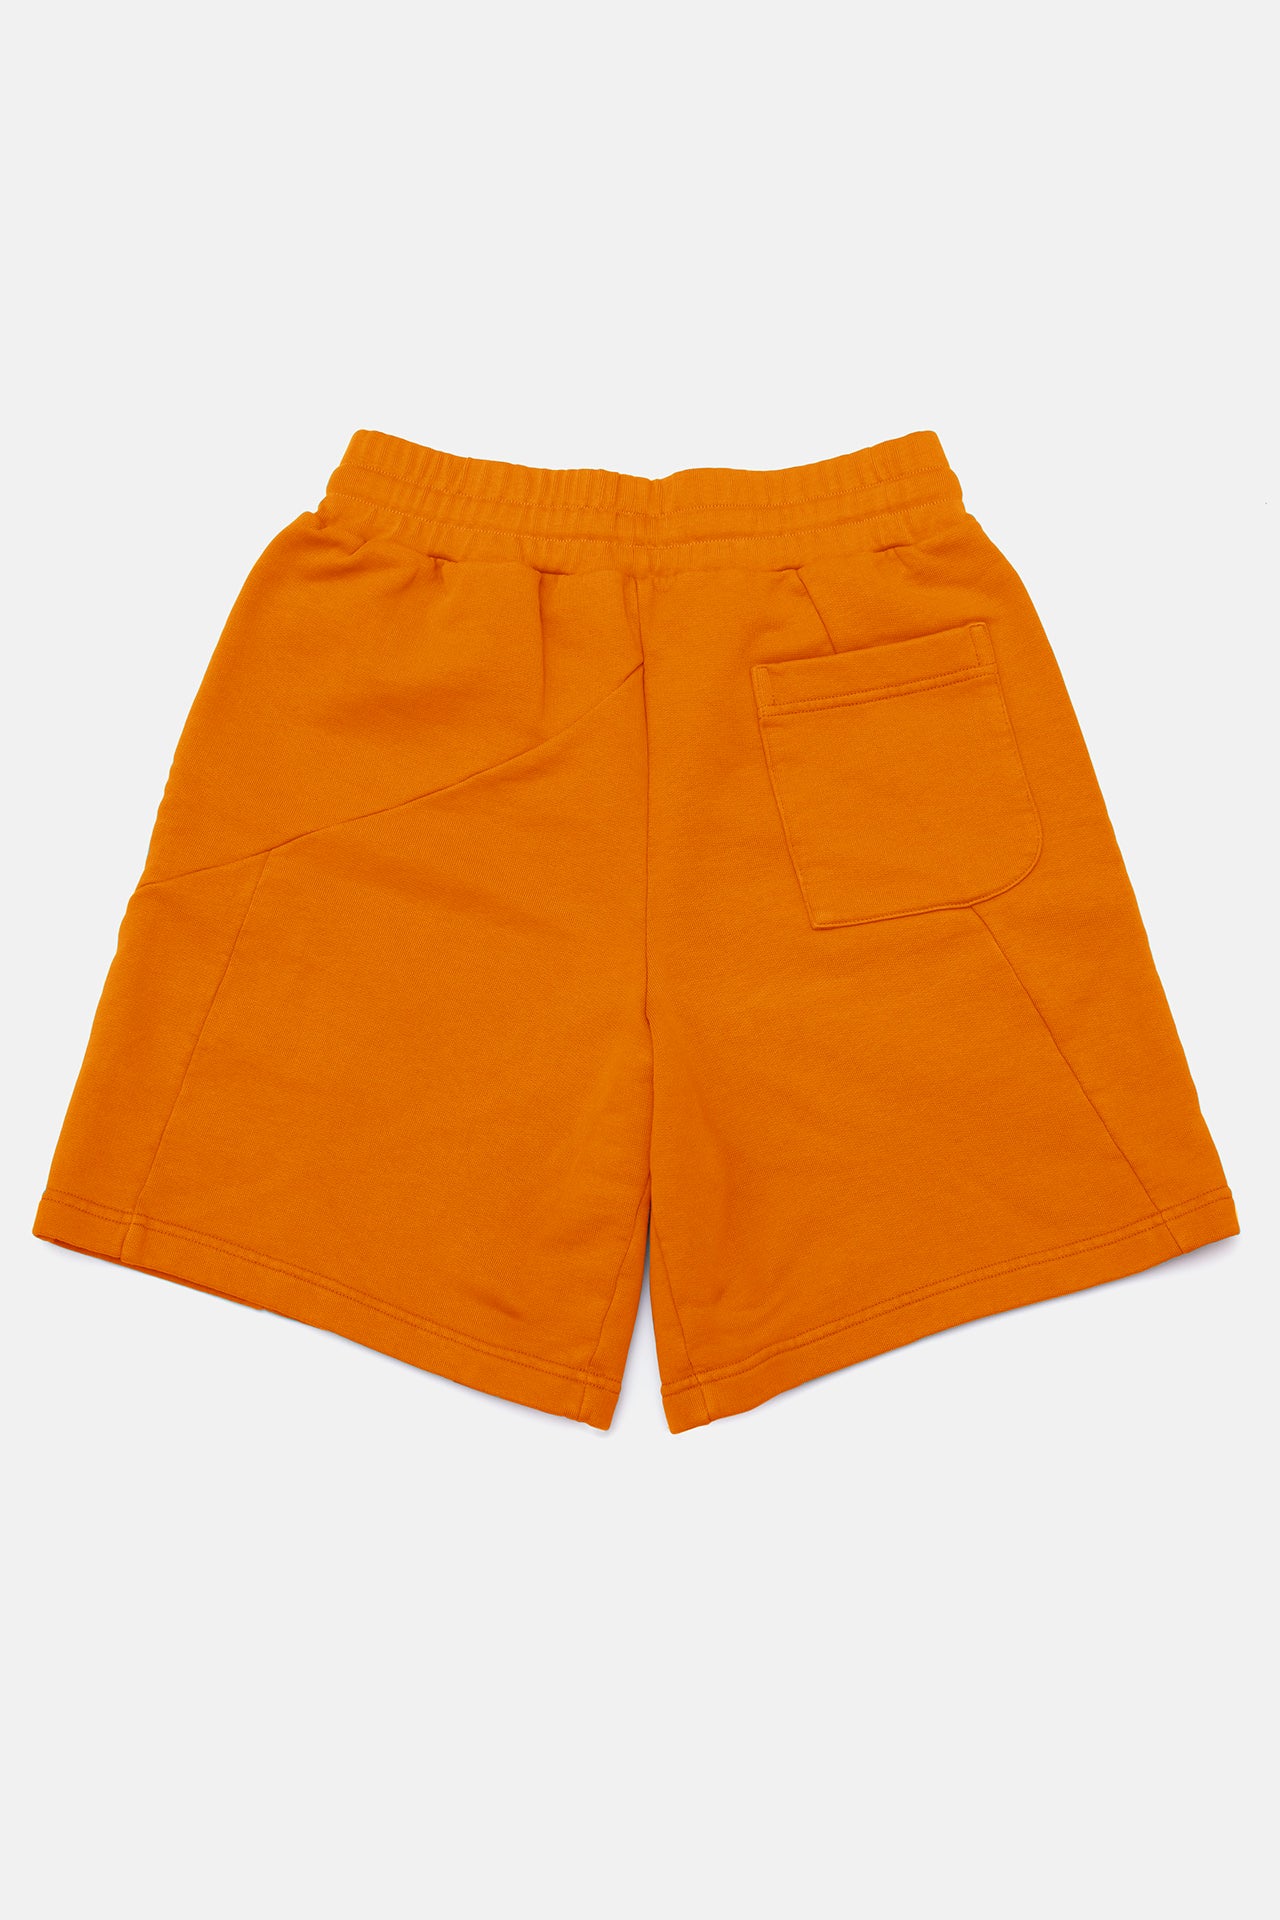 RSF x DC Deconstructed Terry Shorts¬†Rusty Orange - Retrosuperfuture -